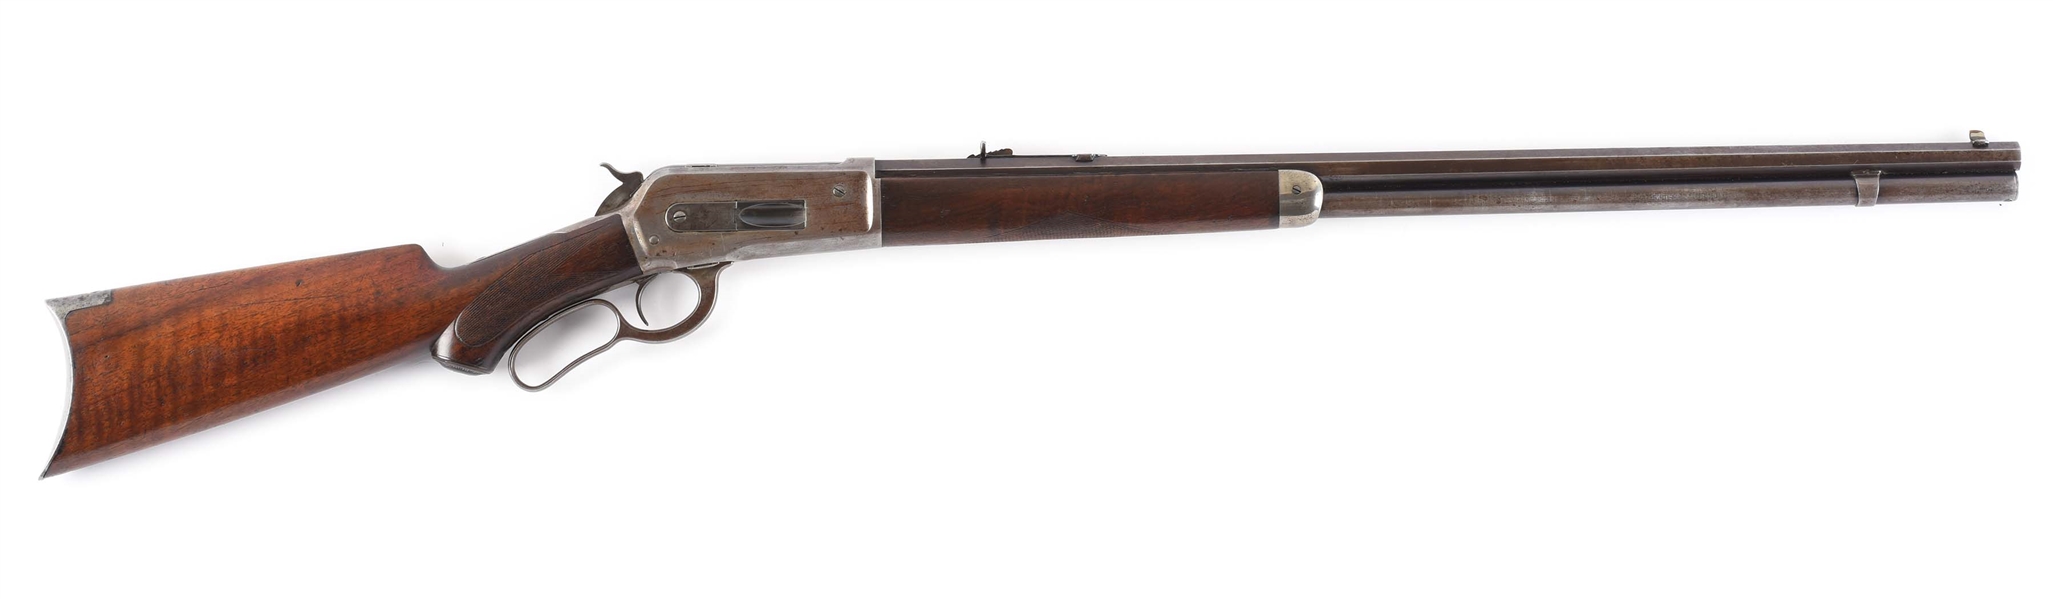 (C) SPECIAL ORDER DELUXE WINCHESTER MODEL 1886 LEVER ACTION RIFLE (1900).